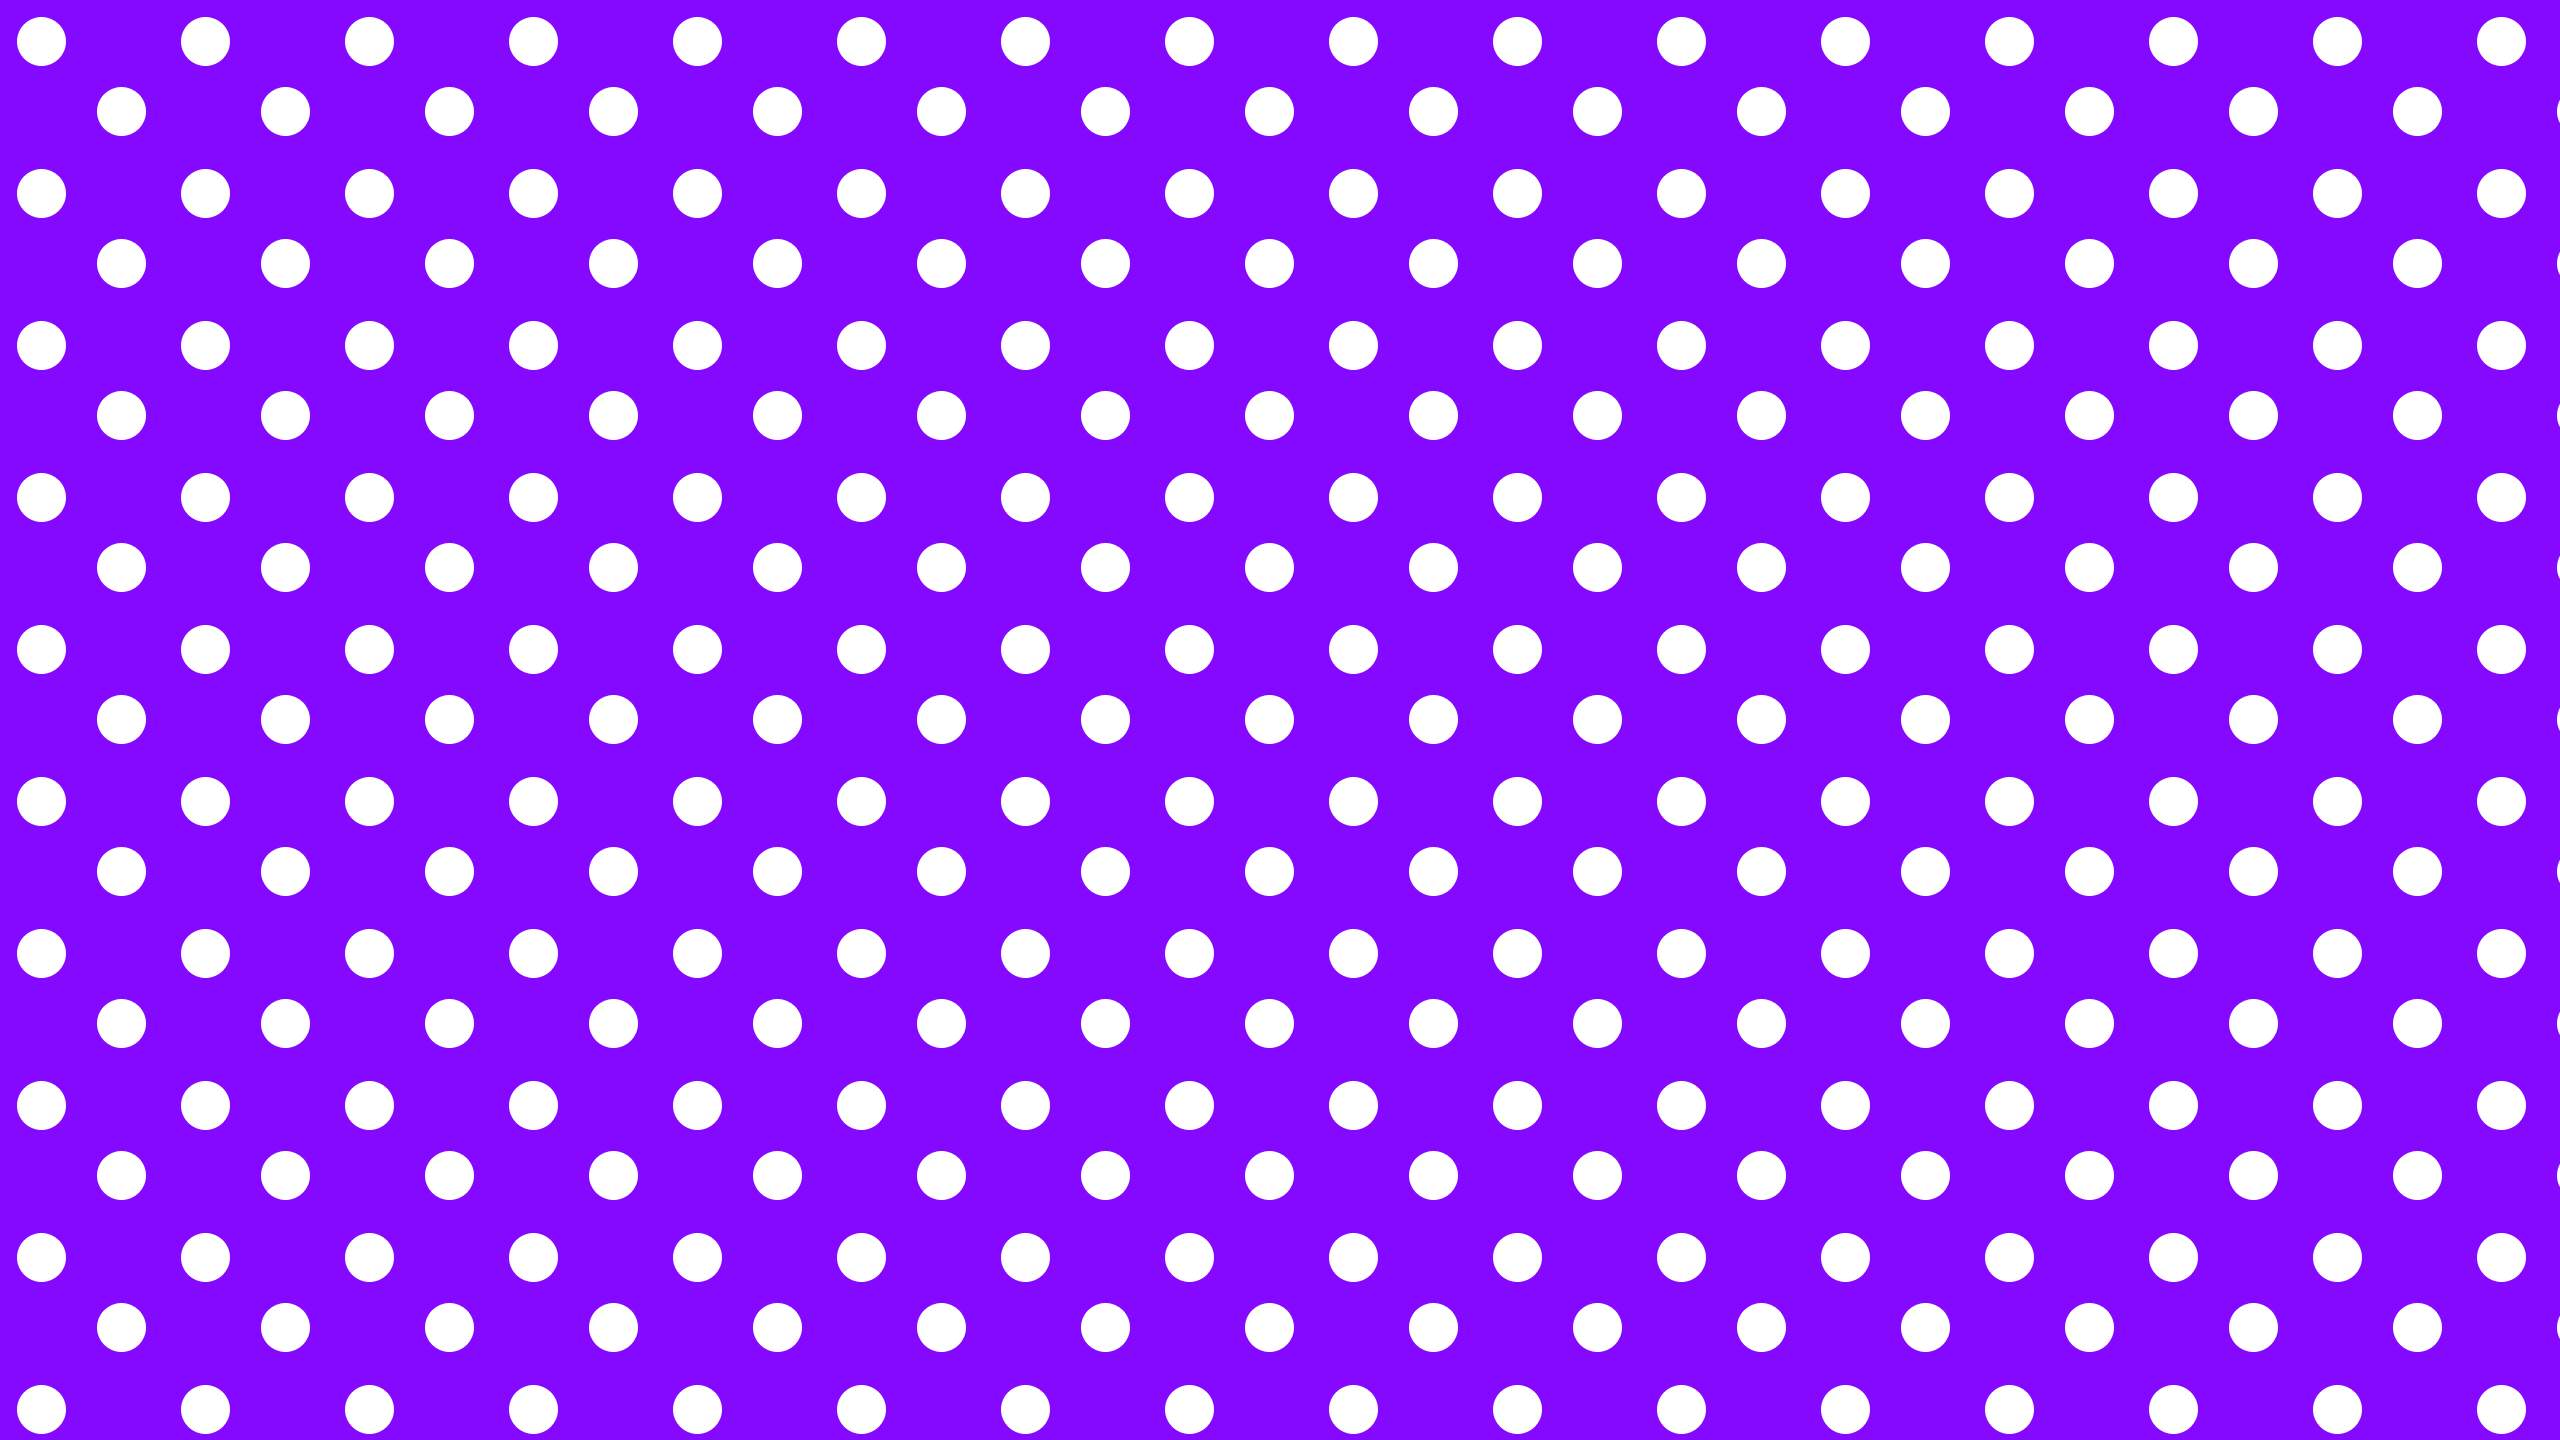 This Large Purple Desktop Wallpaper Is Easy Just Save The